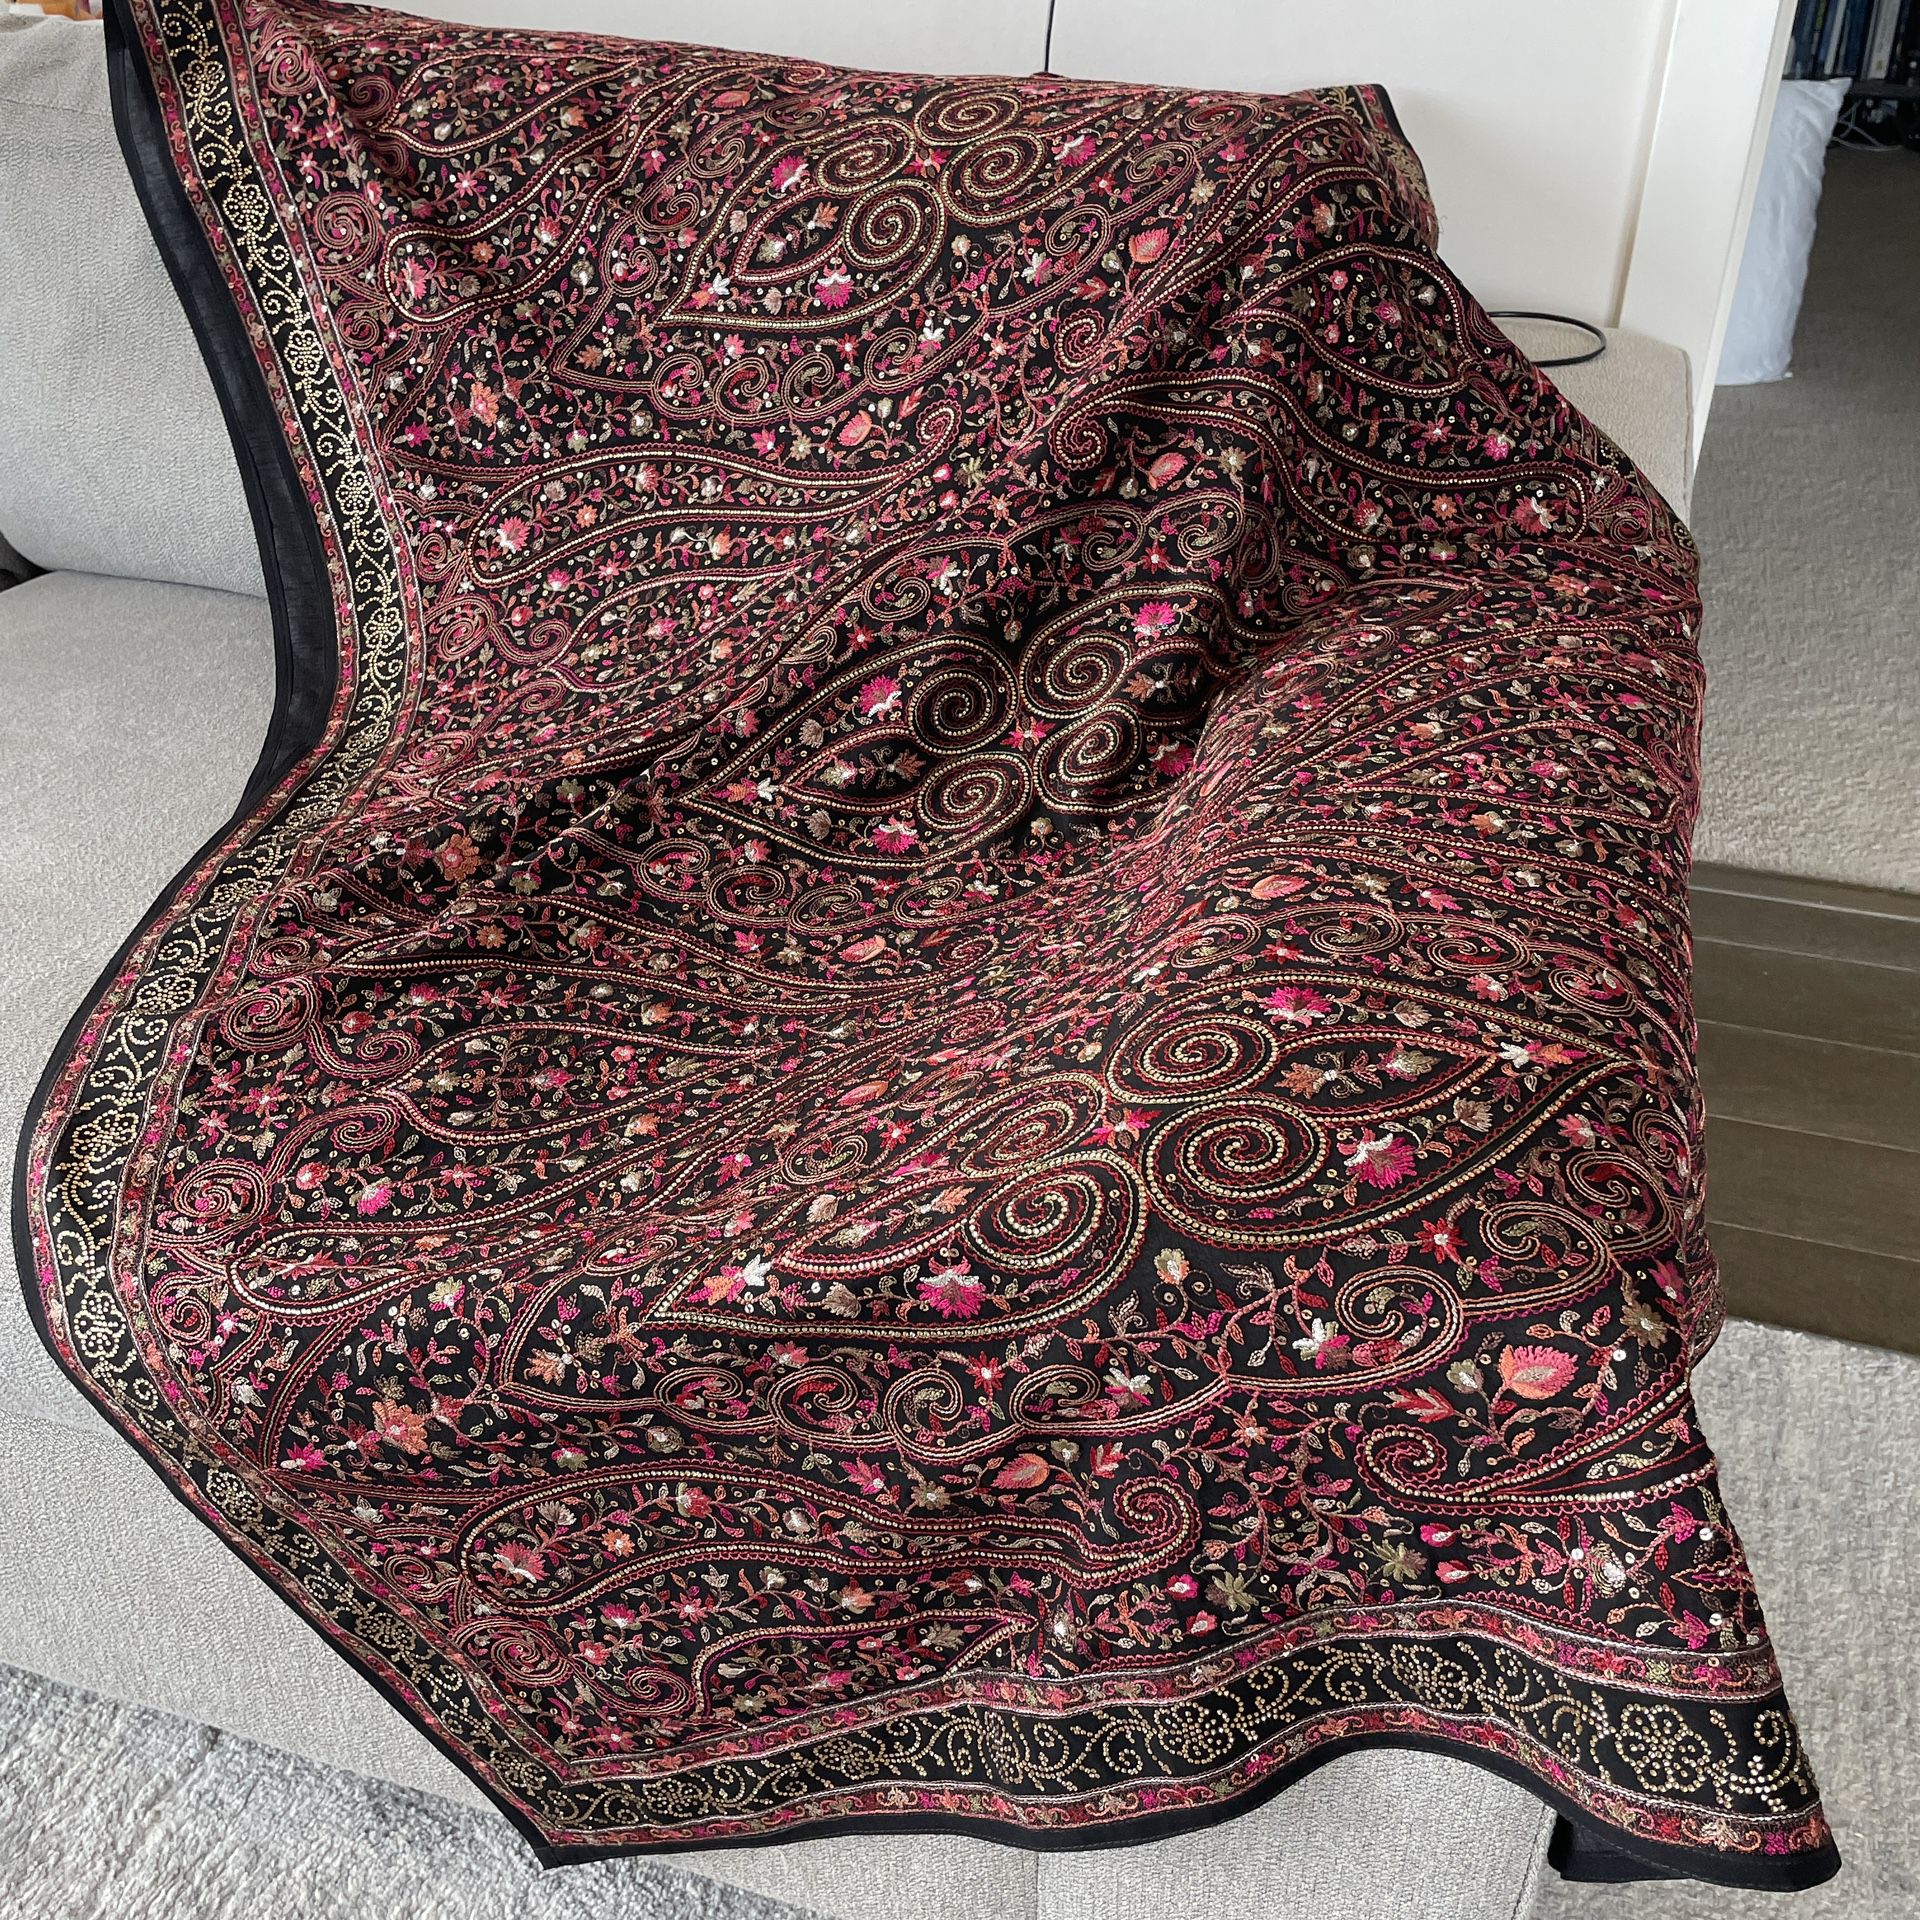 Embroidered Indian shawl 